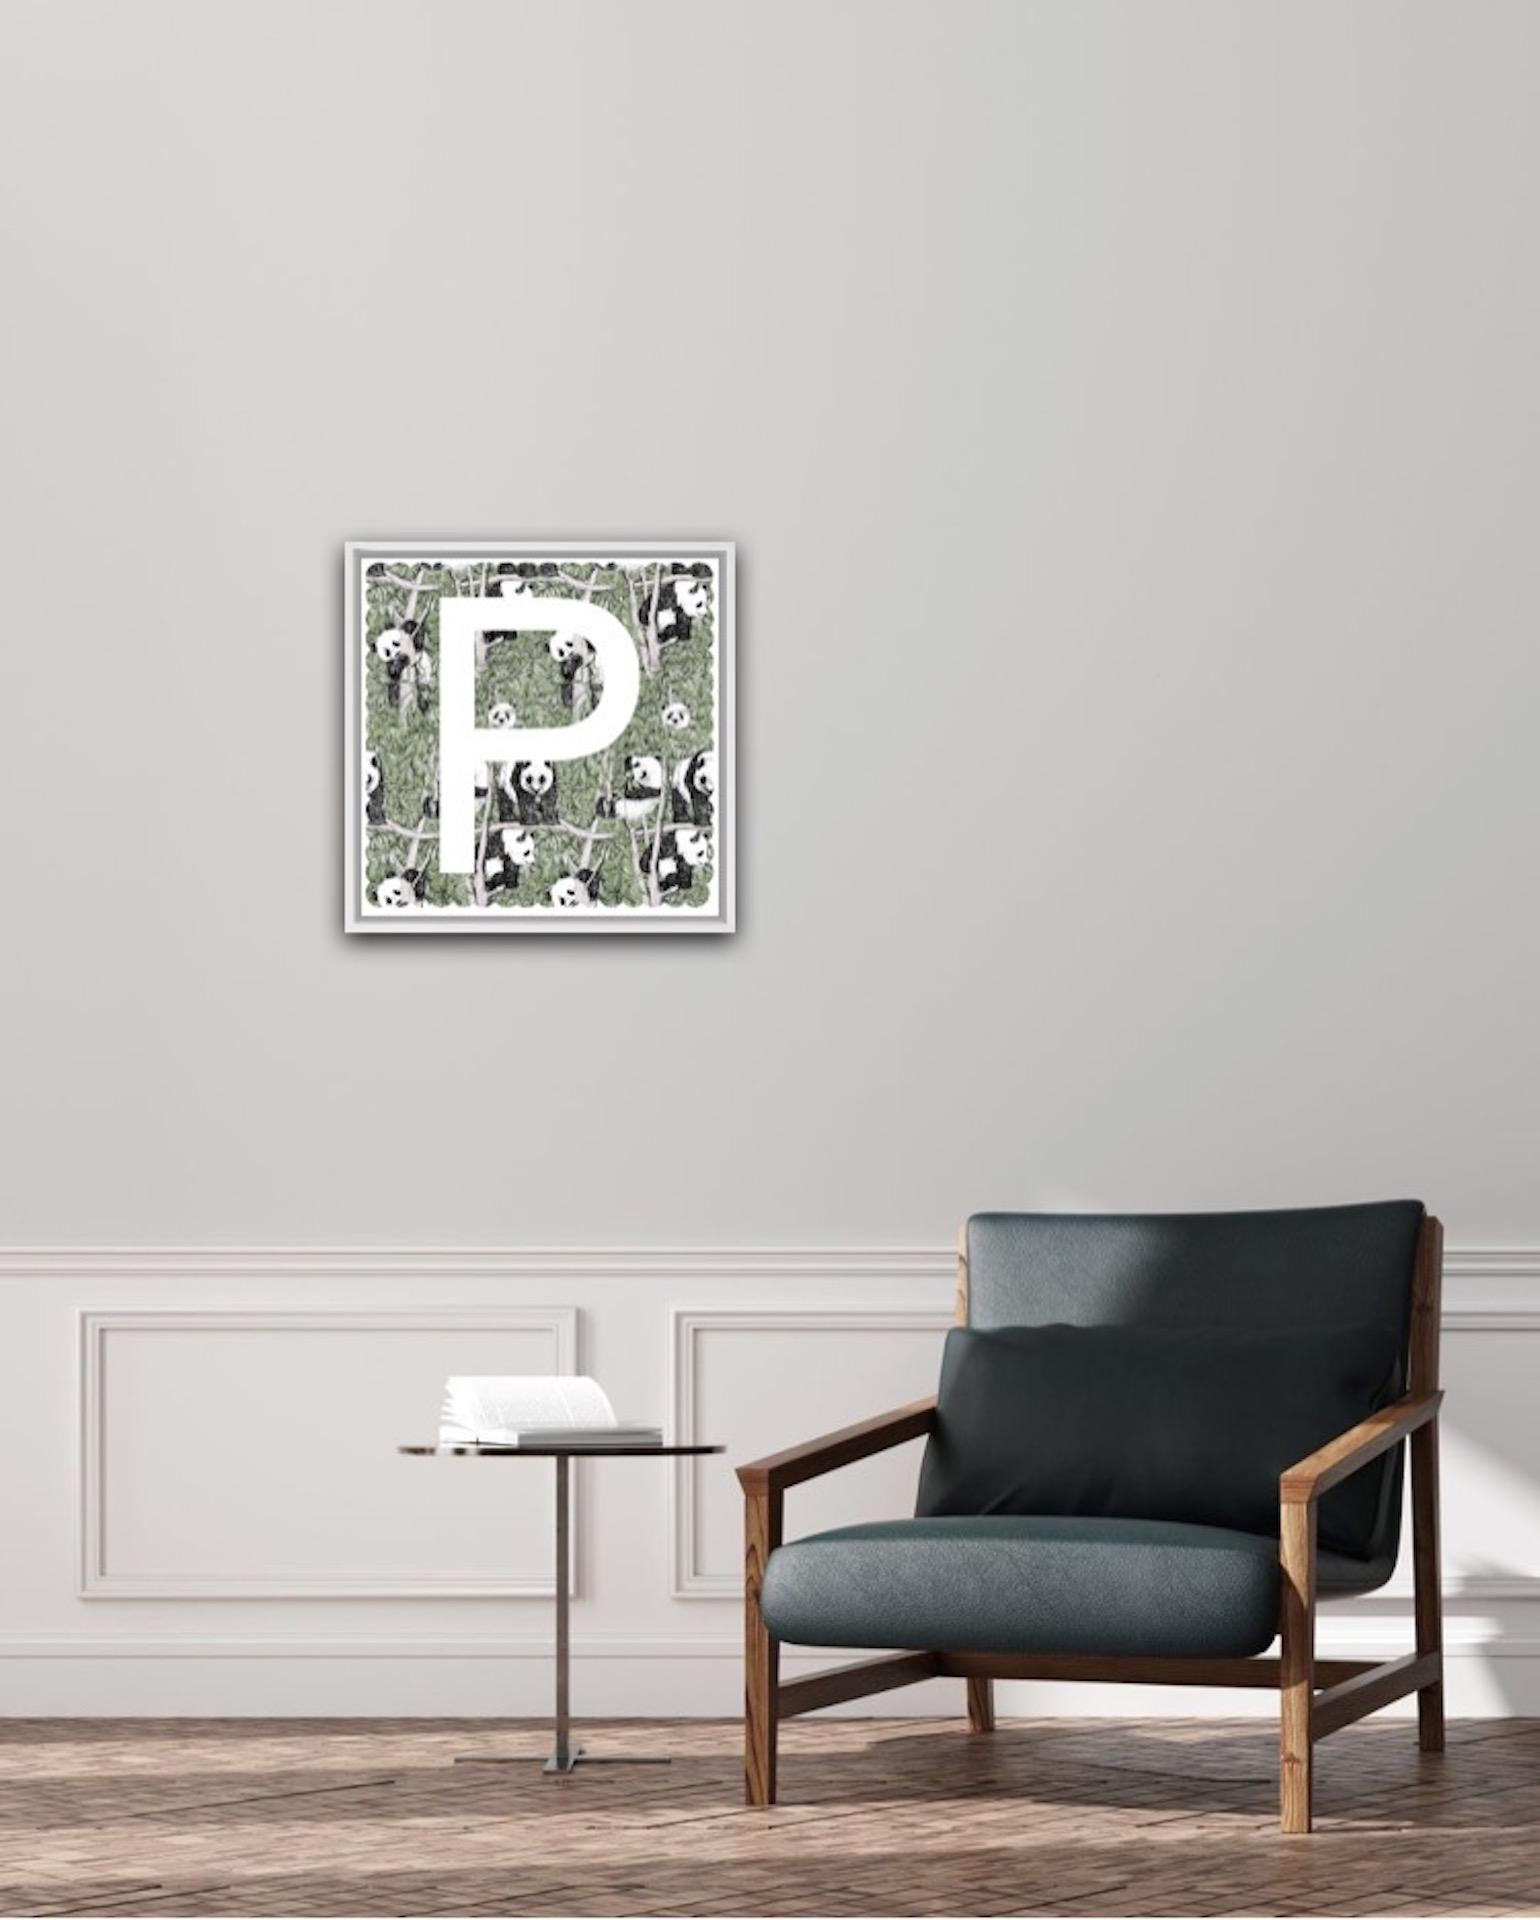 Clare Halifax, P is for Panda, Affordable Contemporary Art, Alphabet Prints 5